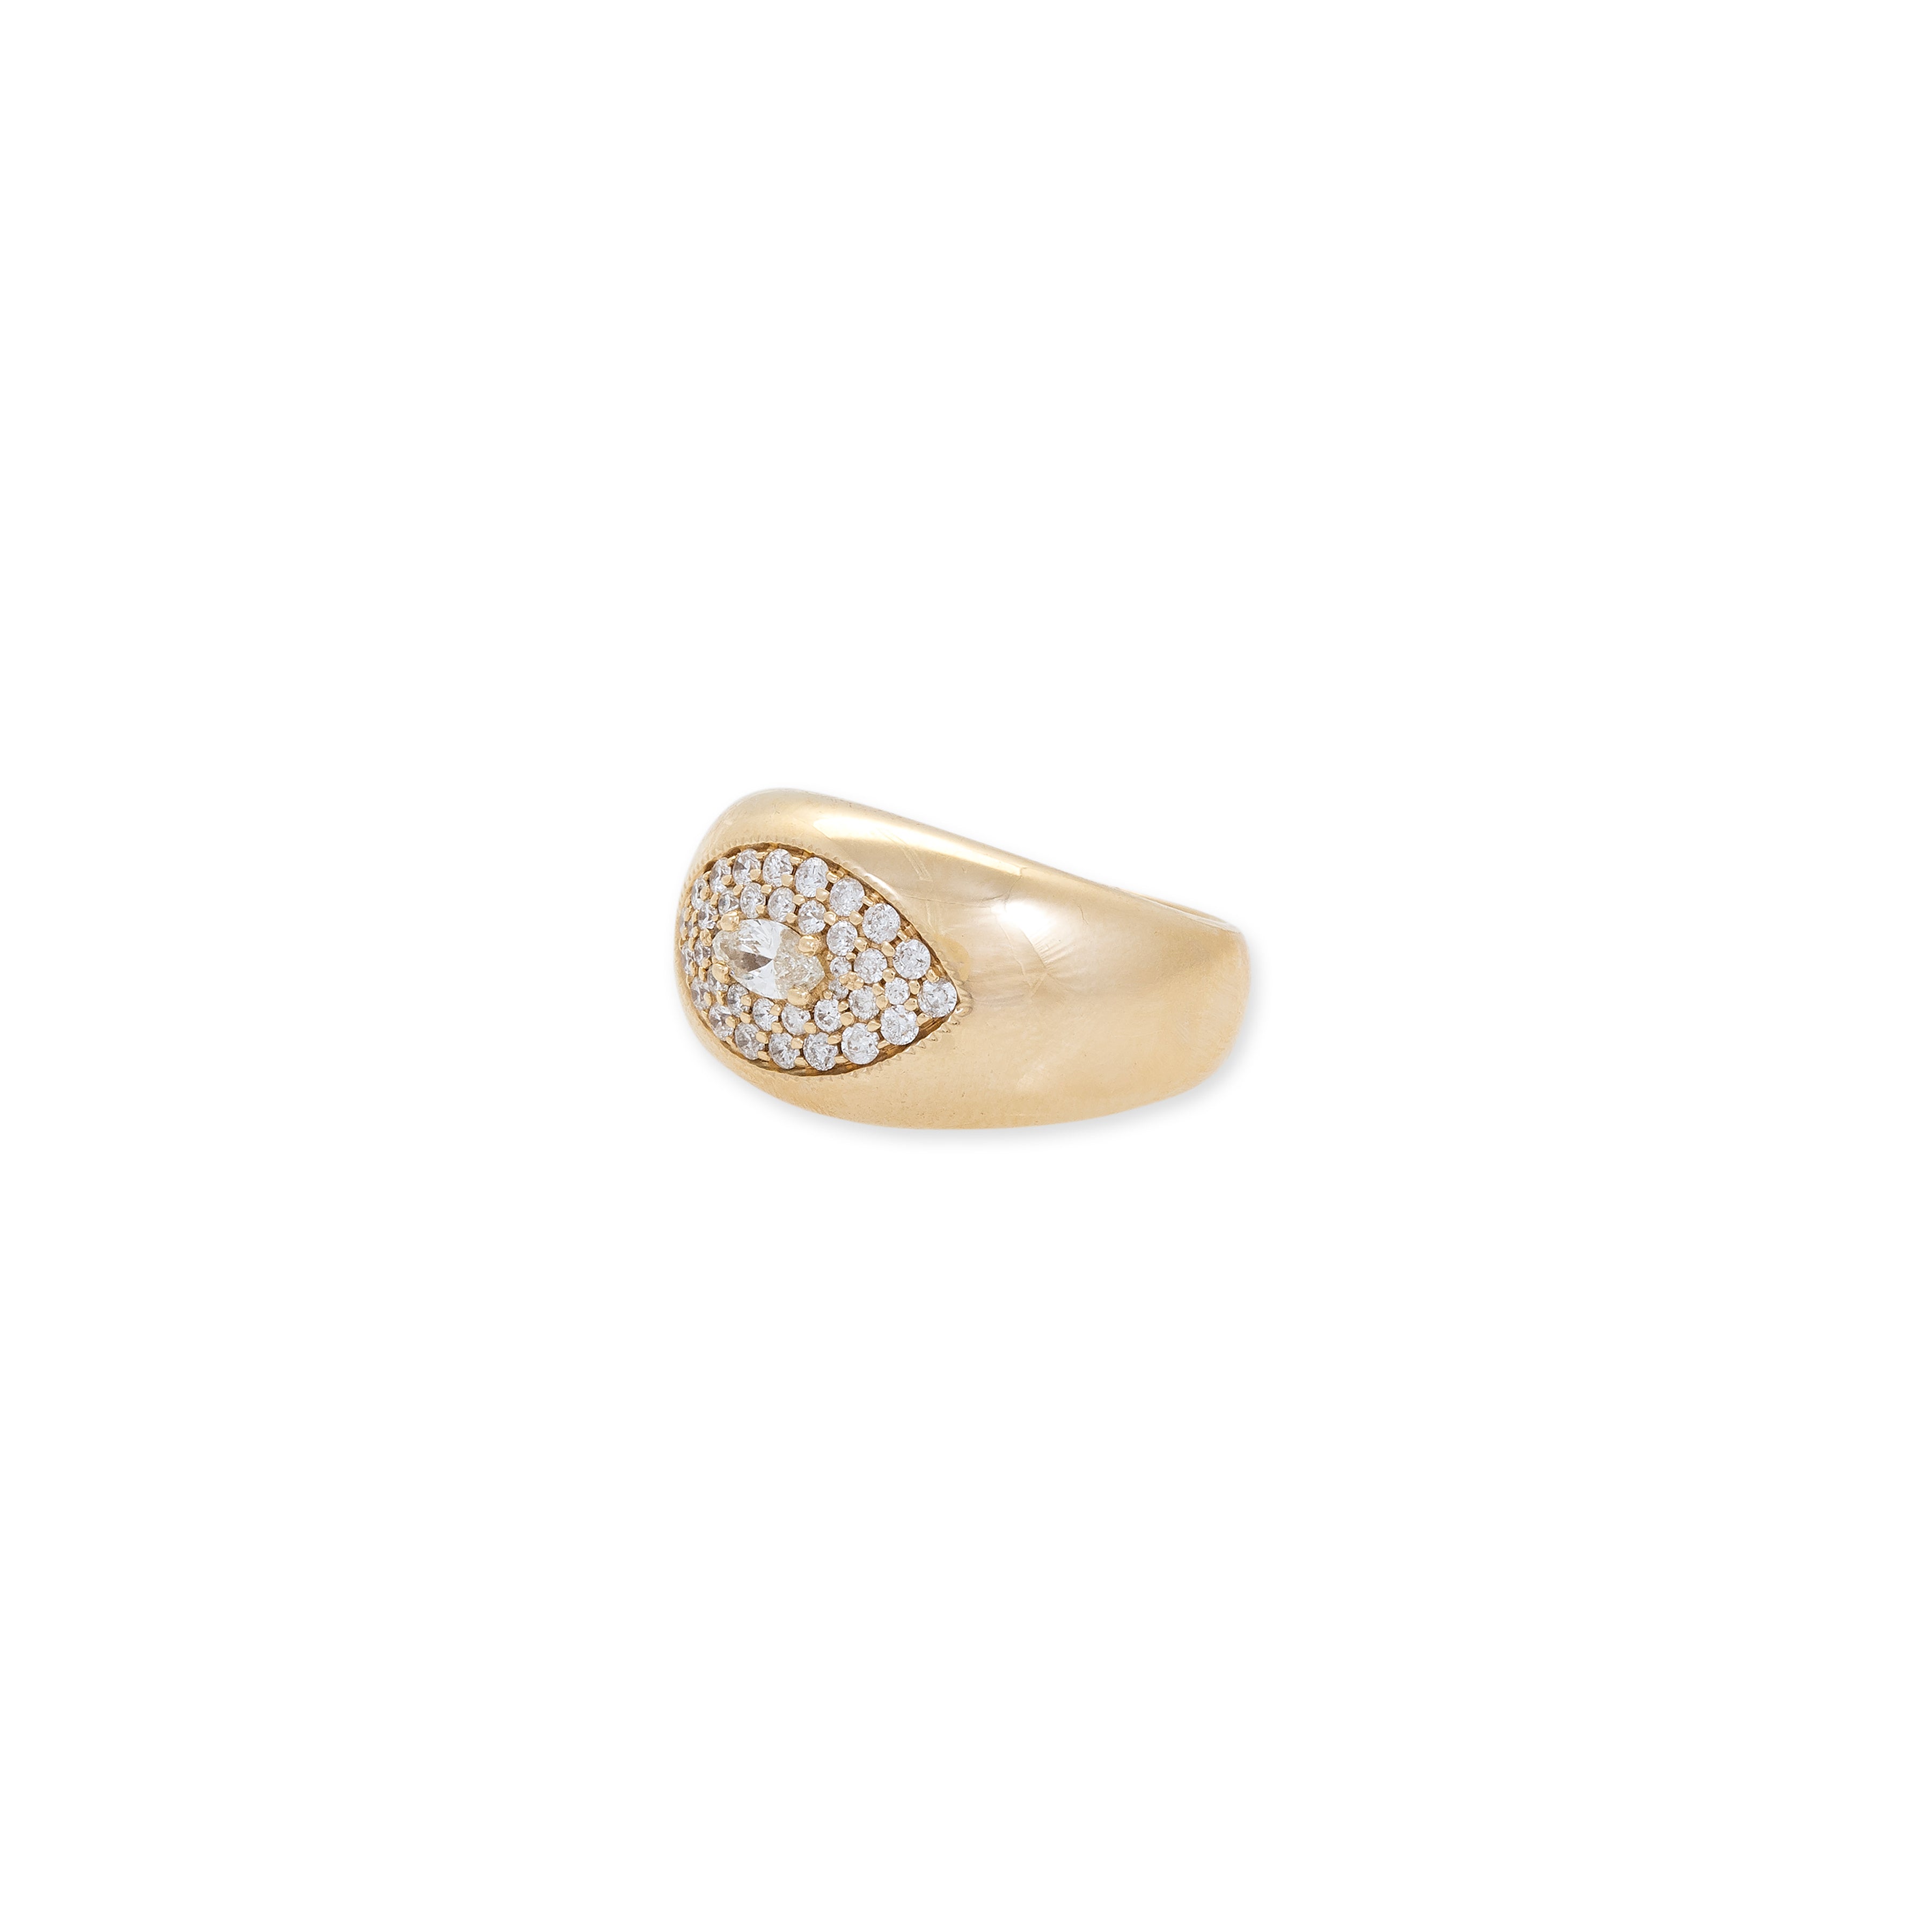 PAVE MARQUISE DIAMOND EYE THICK DOME RING